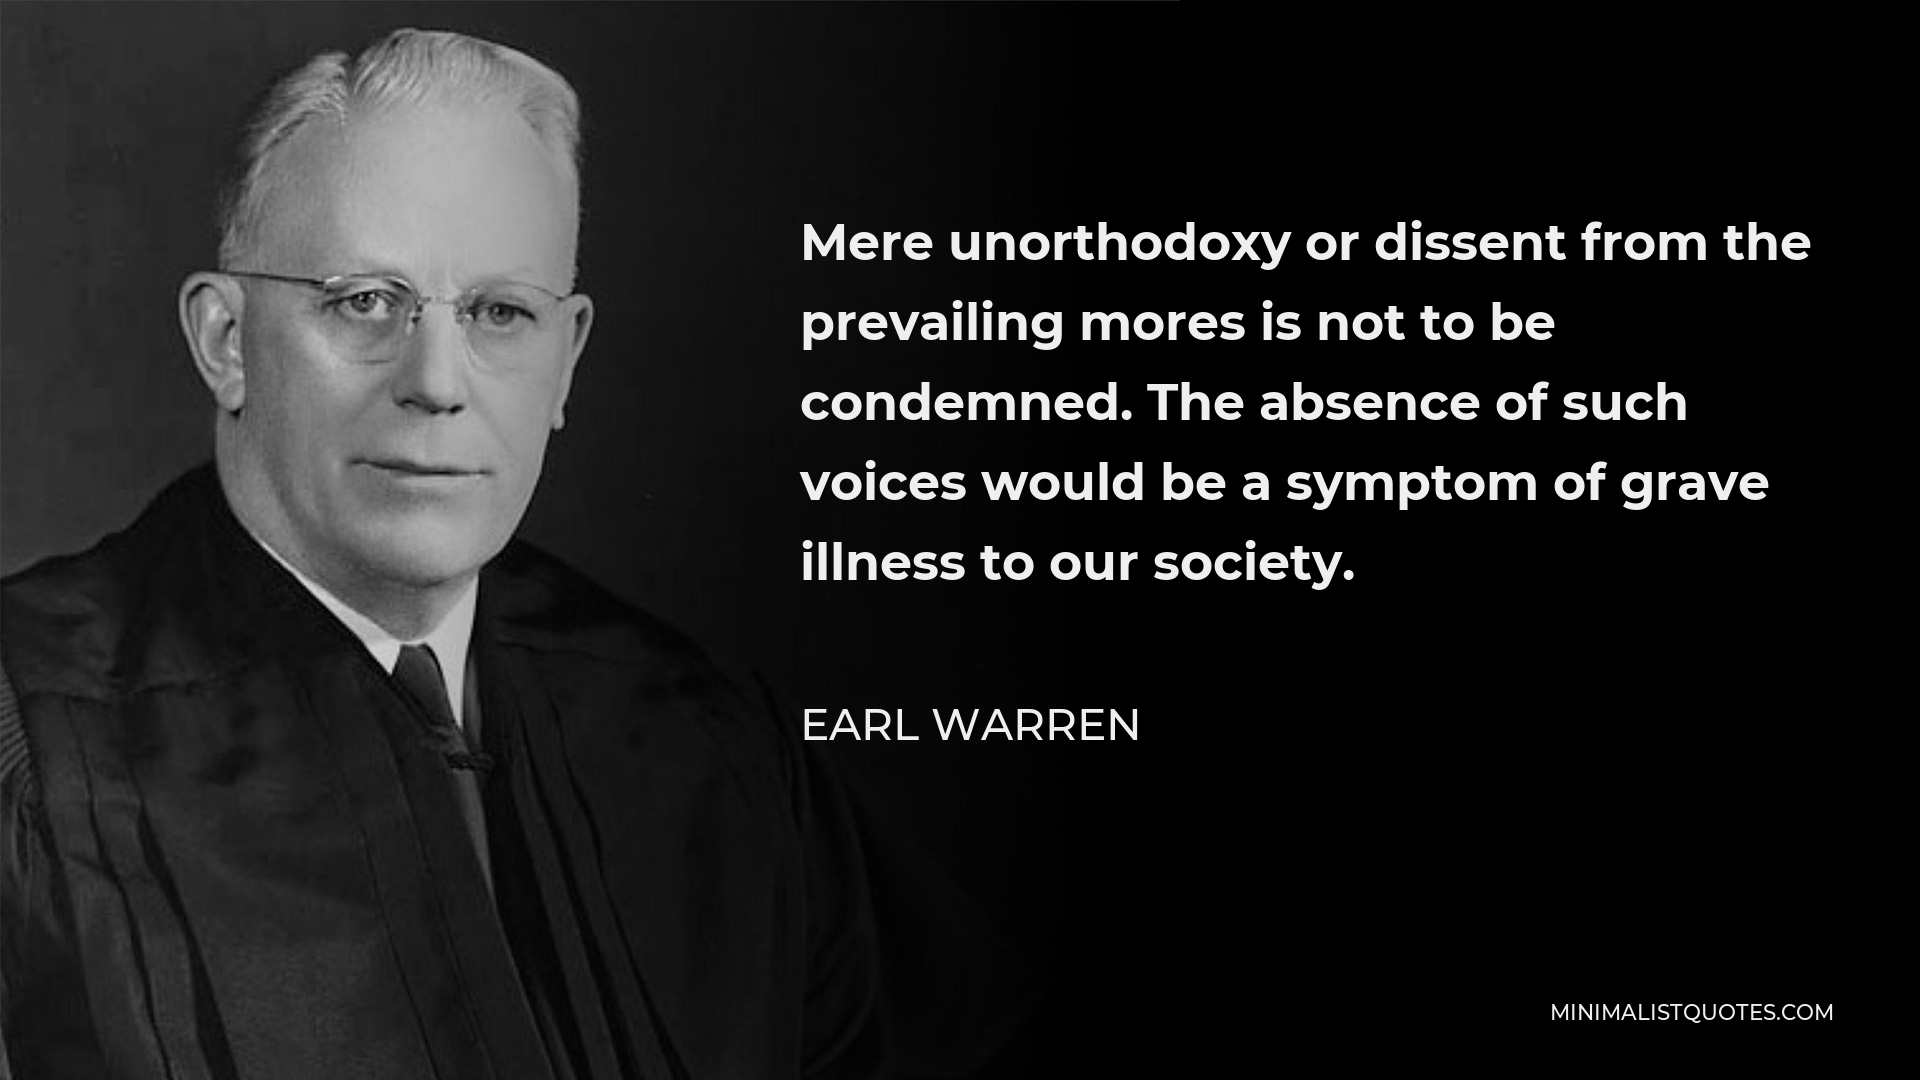 Earl Warren Quote - Mere unorthodoxy or dissent from the prevailing mores is not to be condemned. The absence of such voices would be a symptom of grave illness to our society.